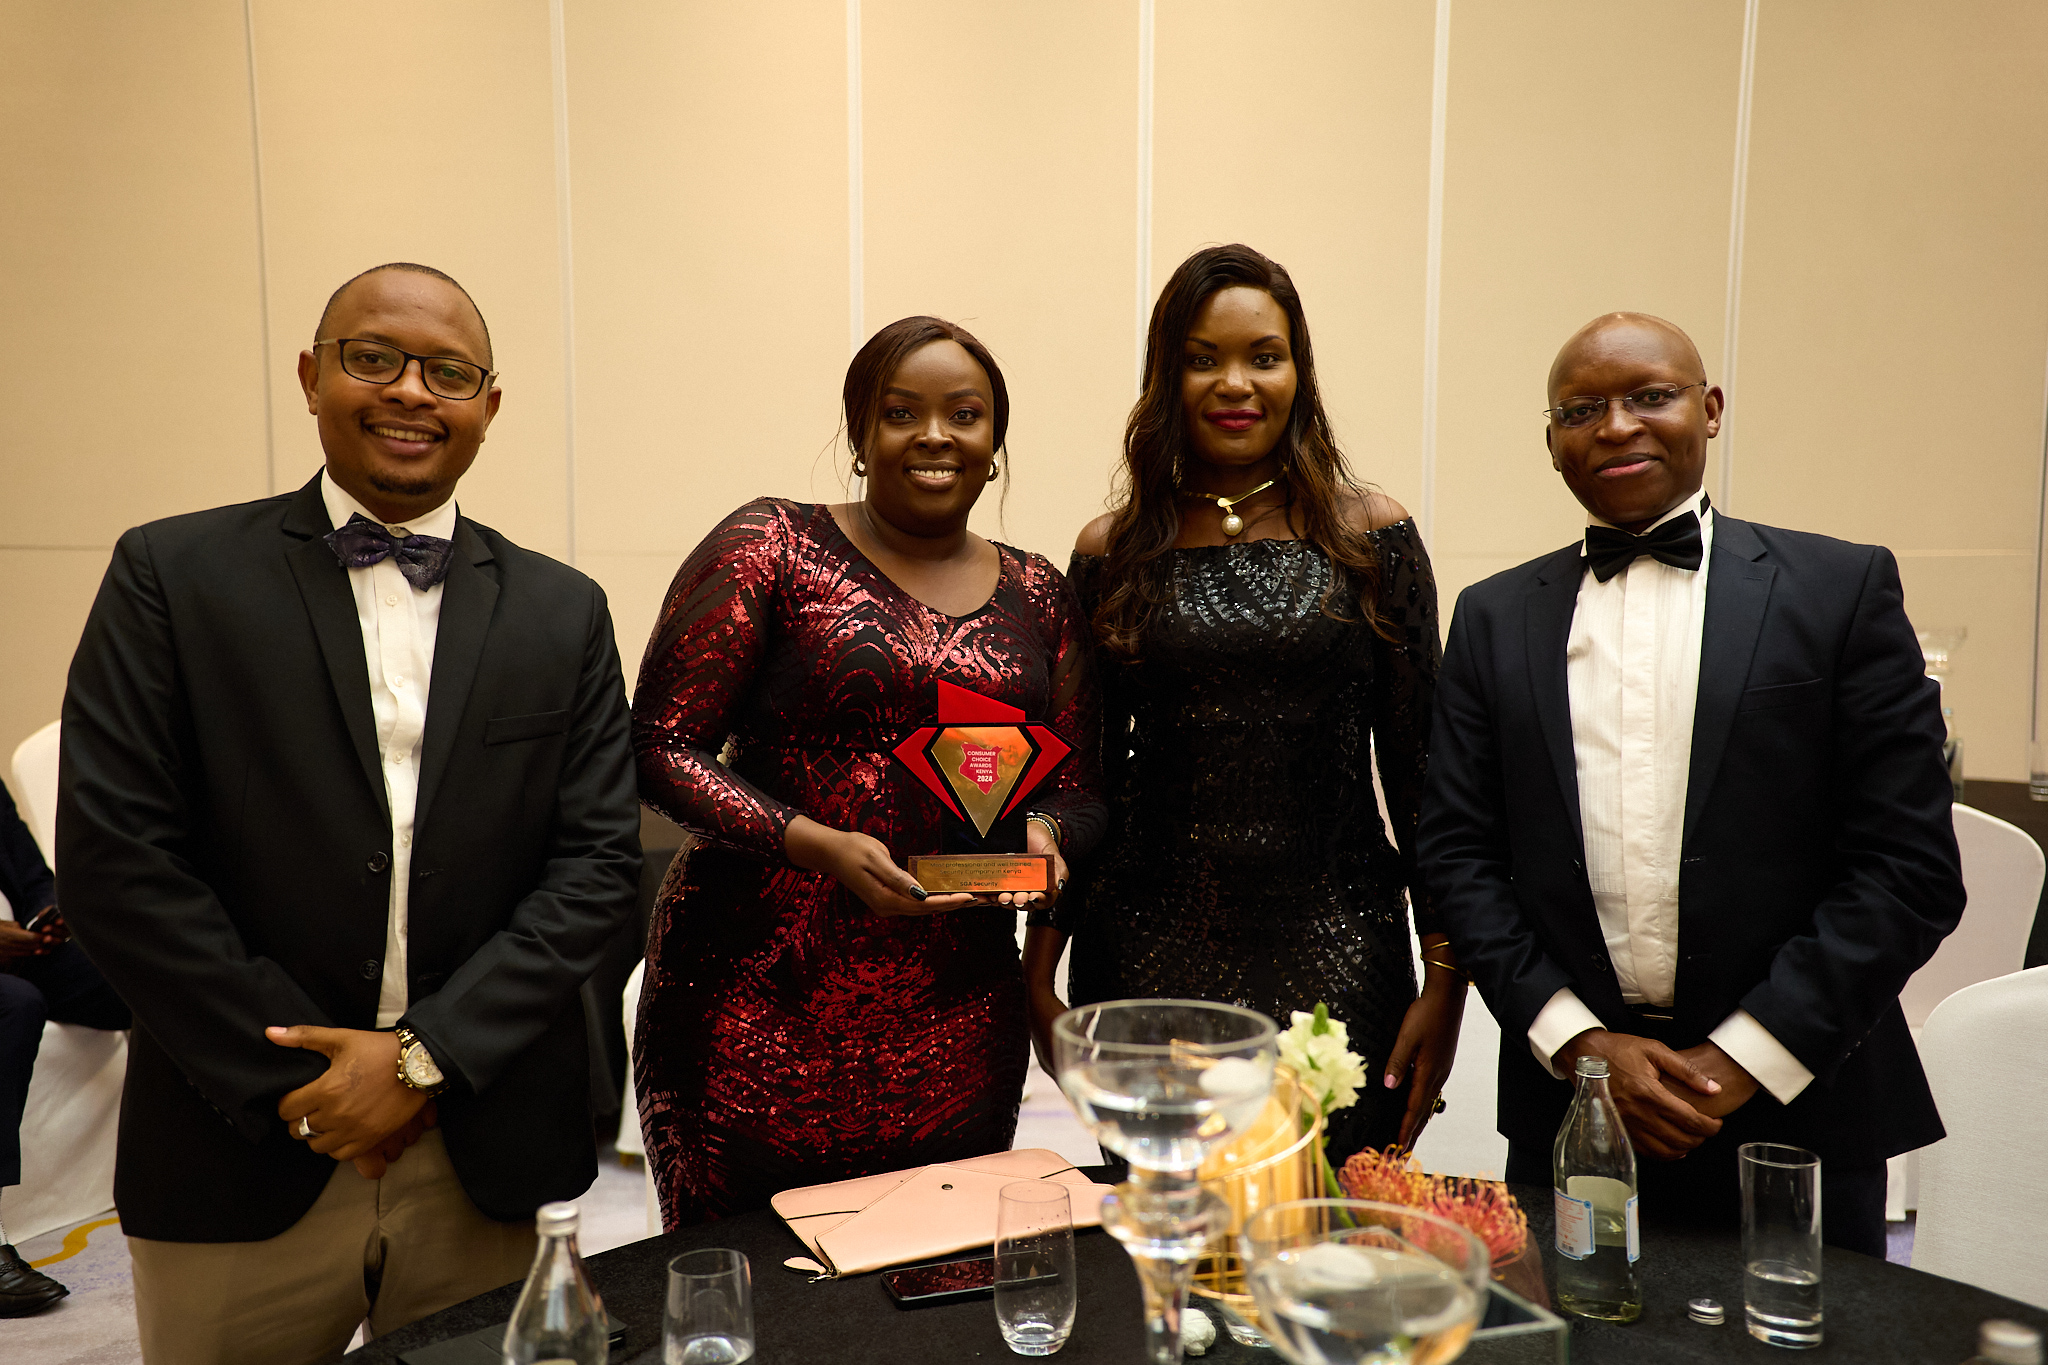 SGA Kenya Customer Service Manager Peter Kinyanjui, Group PR and Branding Manager Josephine Wanjiru, Sales & Marketing Manager Irene Opondo and Financial Controller Justus Kenyoru with the award trophy where SGA Security was recognized as the Most Professional and Well-Trained Security Company in Kenya award during the 2024 Consumer Choice Awards